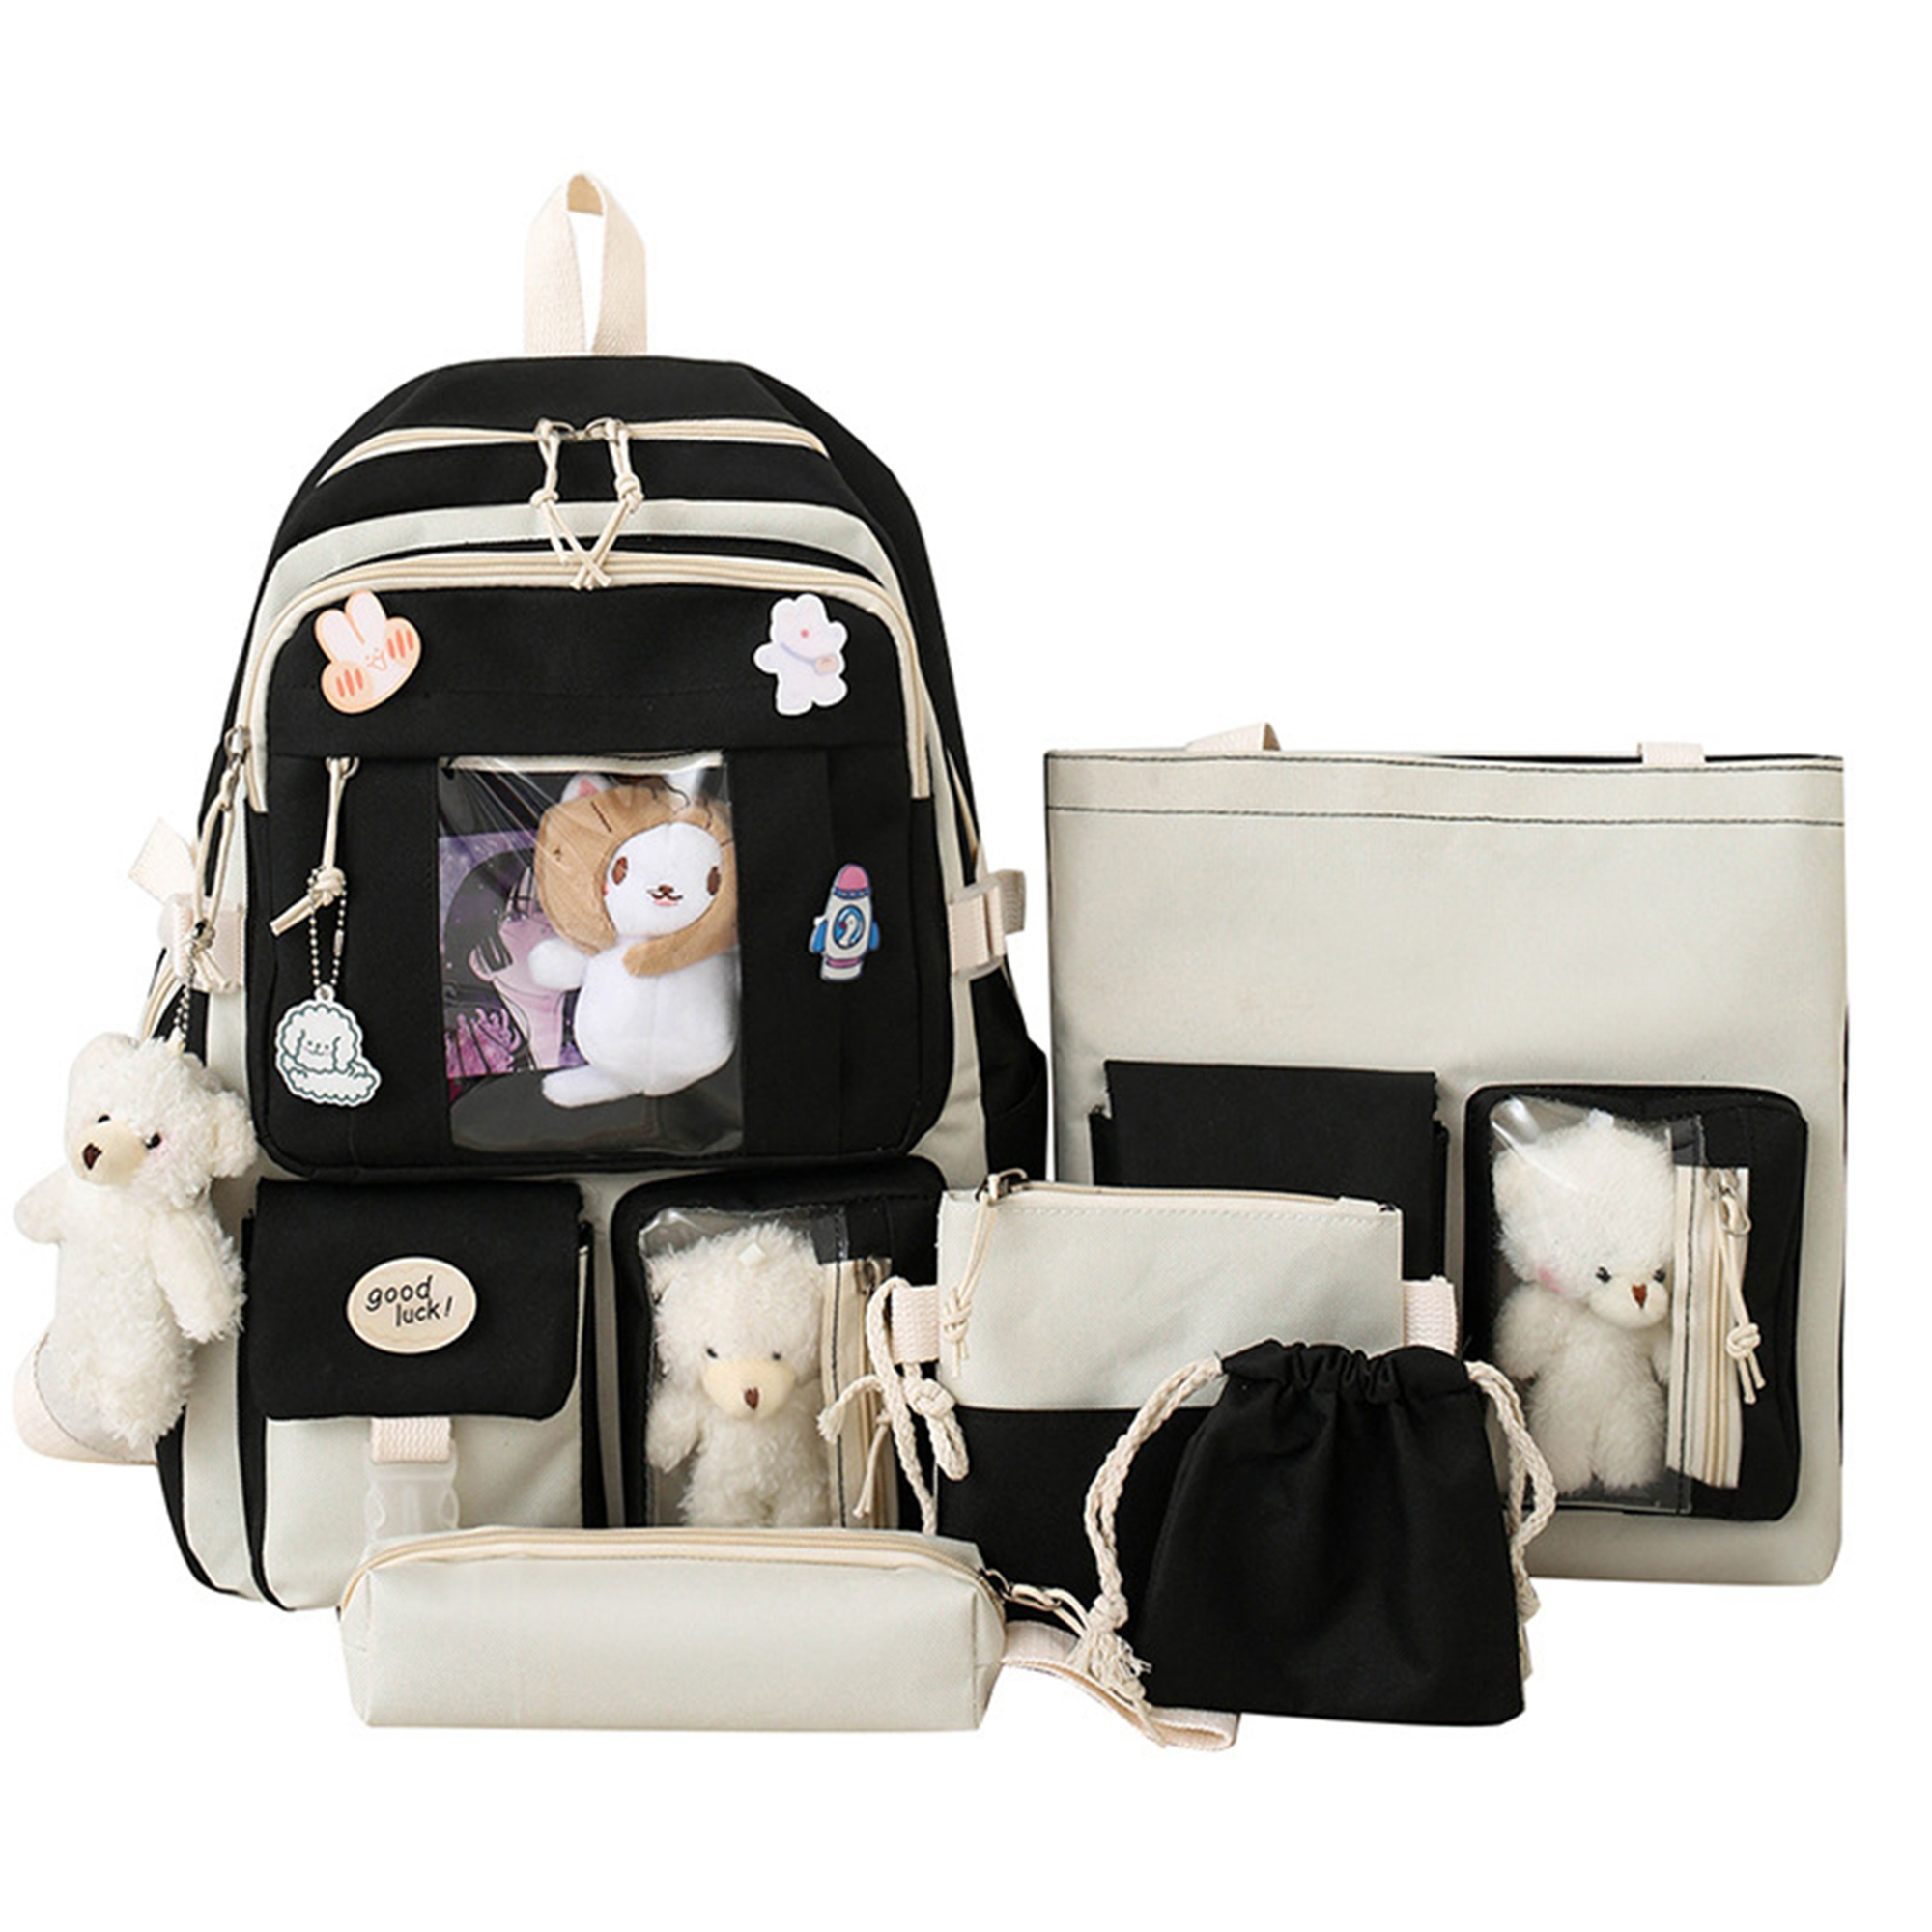 Cute Backpacks for Teen Girls, 16 Inch Kawaii Backpack with Kawaii Pin and Accessories, 5Pcs Backpack Set,Backpack,Drawstring Bag, Shoulderbag, Pencil Case and Wallet - image 1 of 7